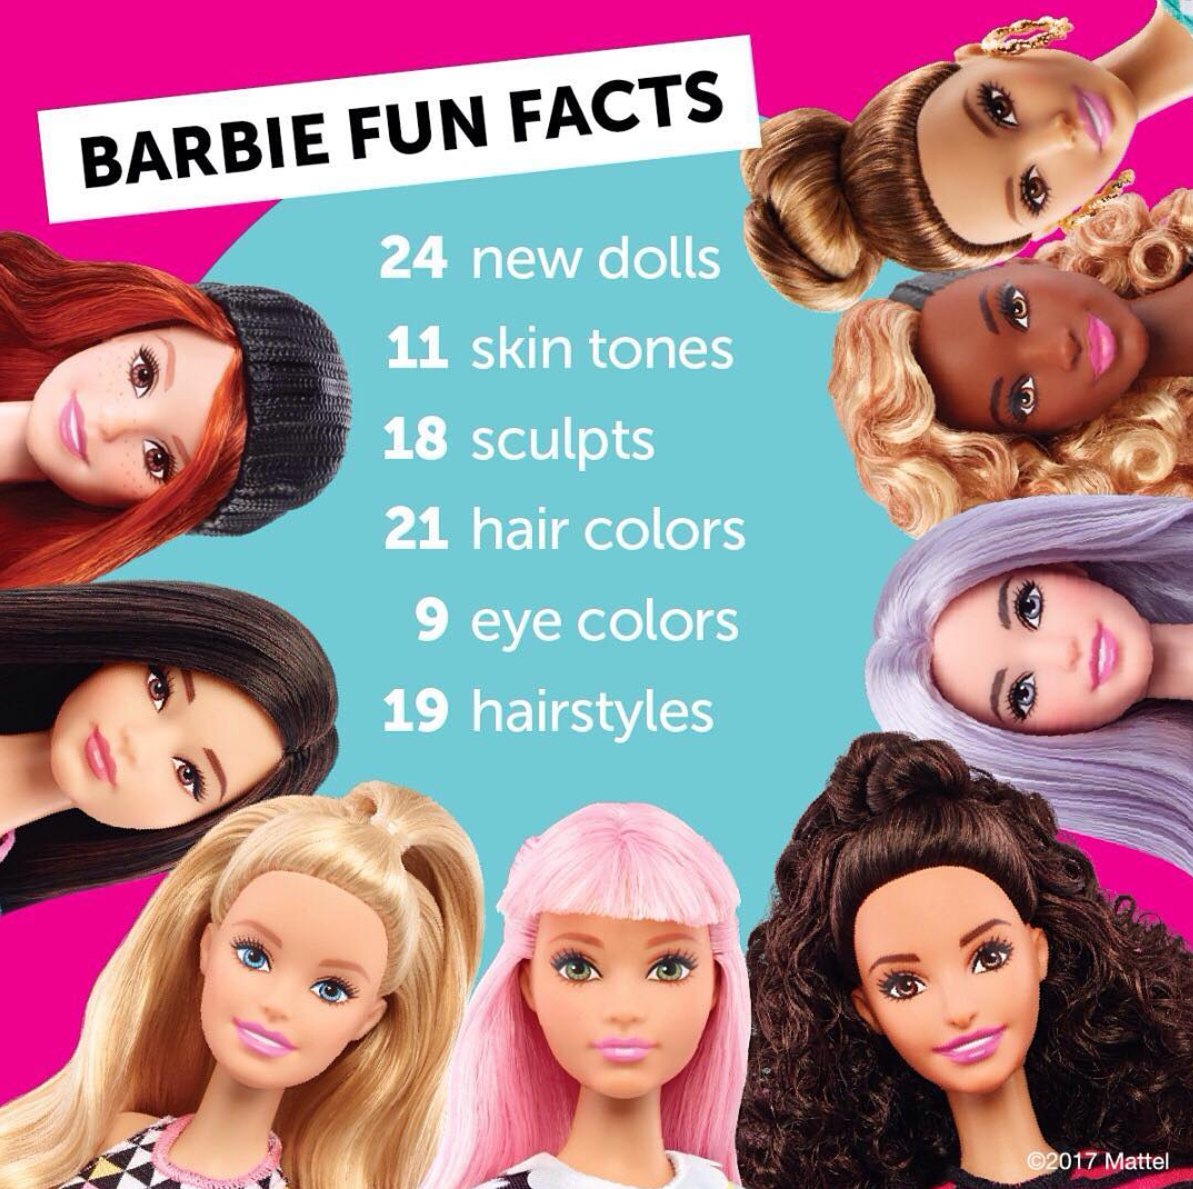 Entity shows how diversity saved Barbie.